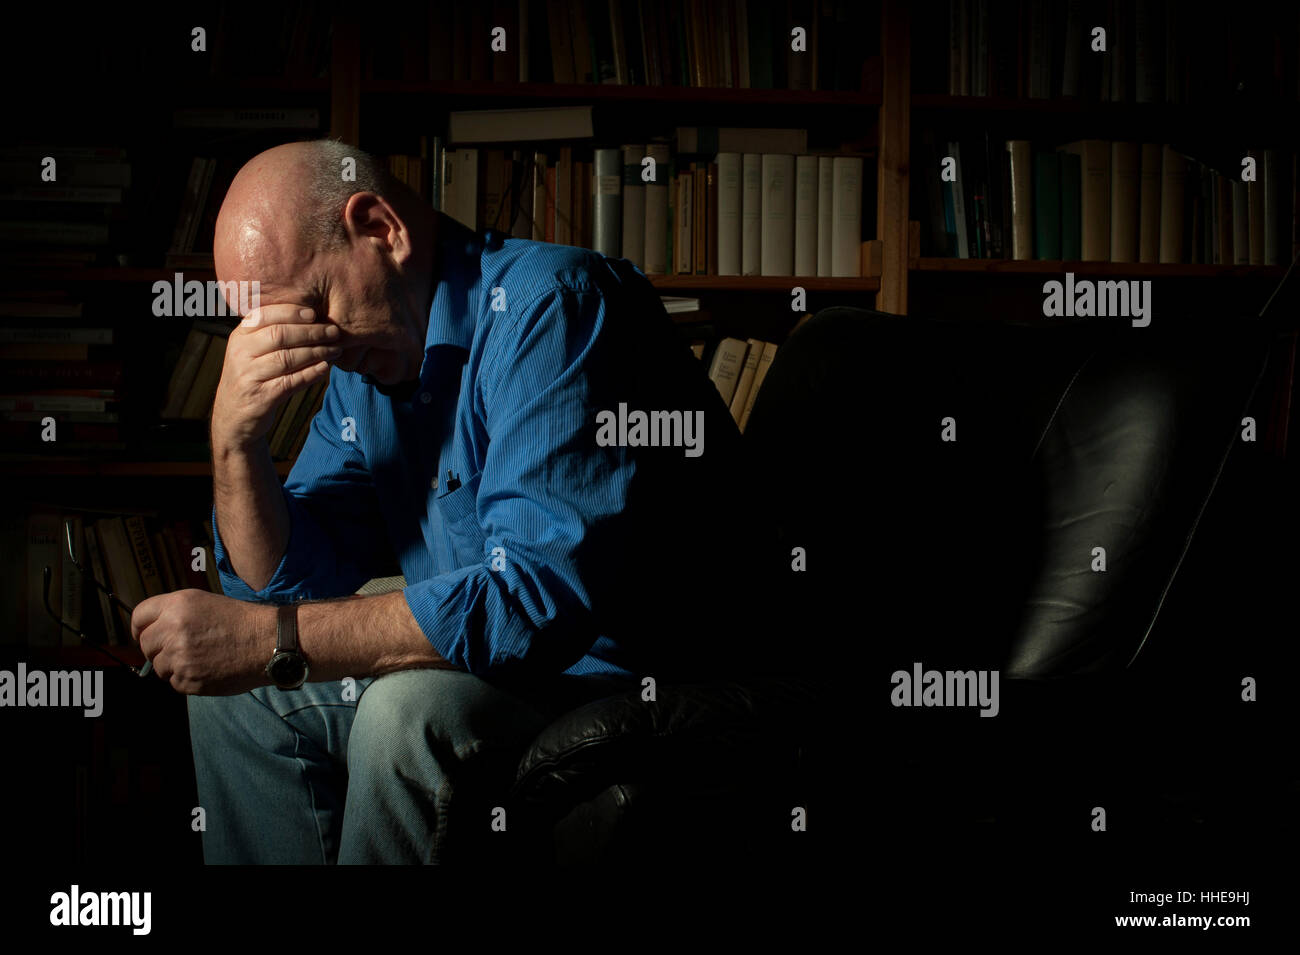 An older man suffering from depression/anxiety/sadness. Stock Photo